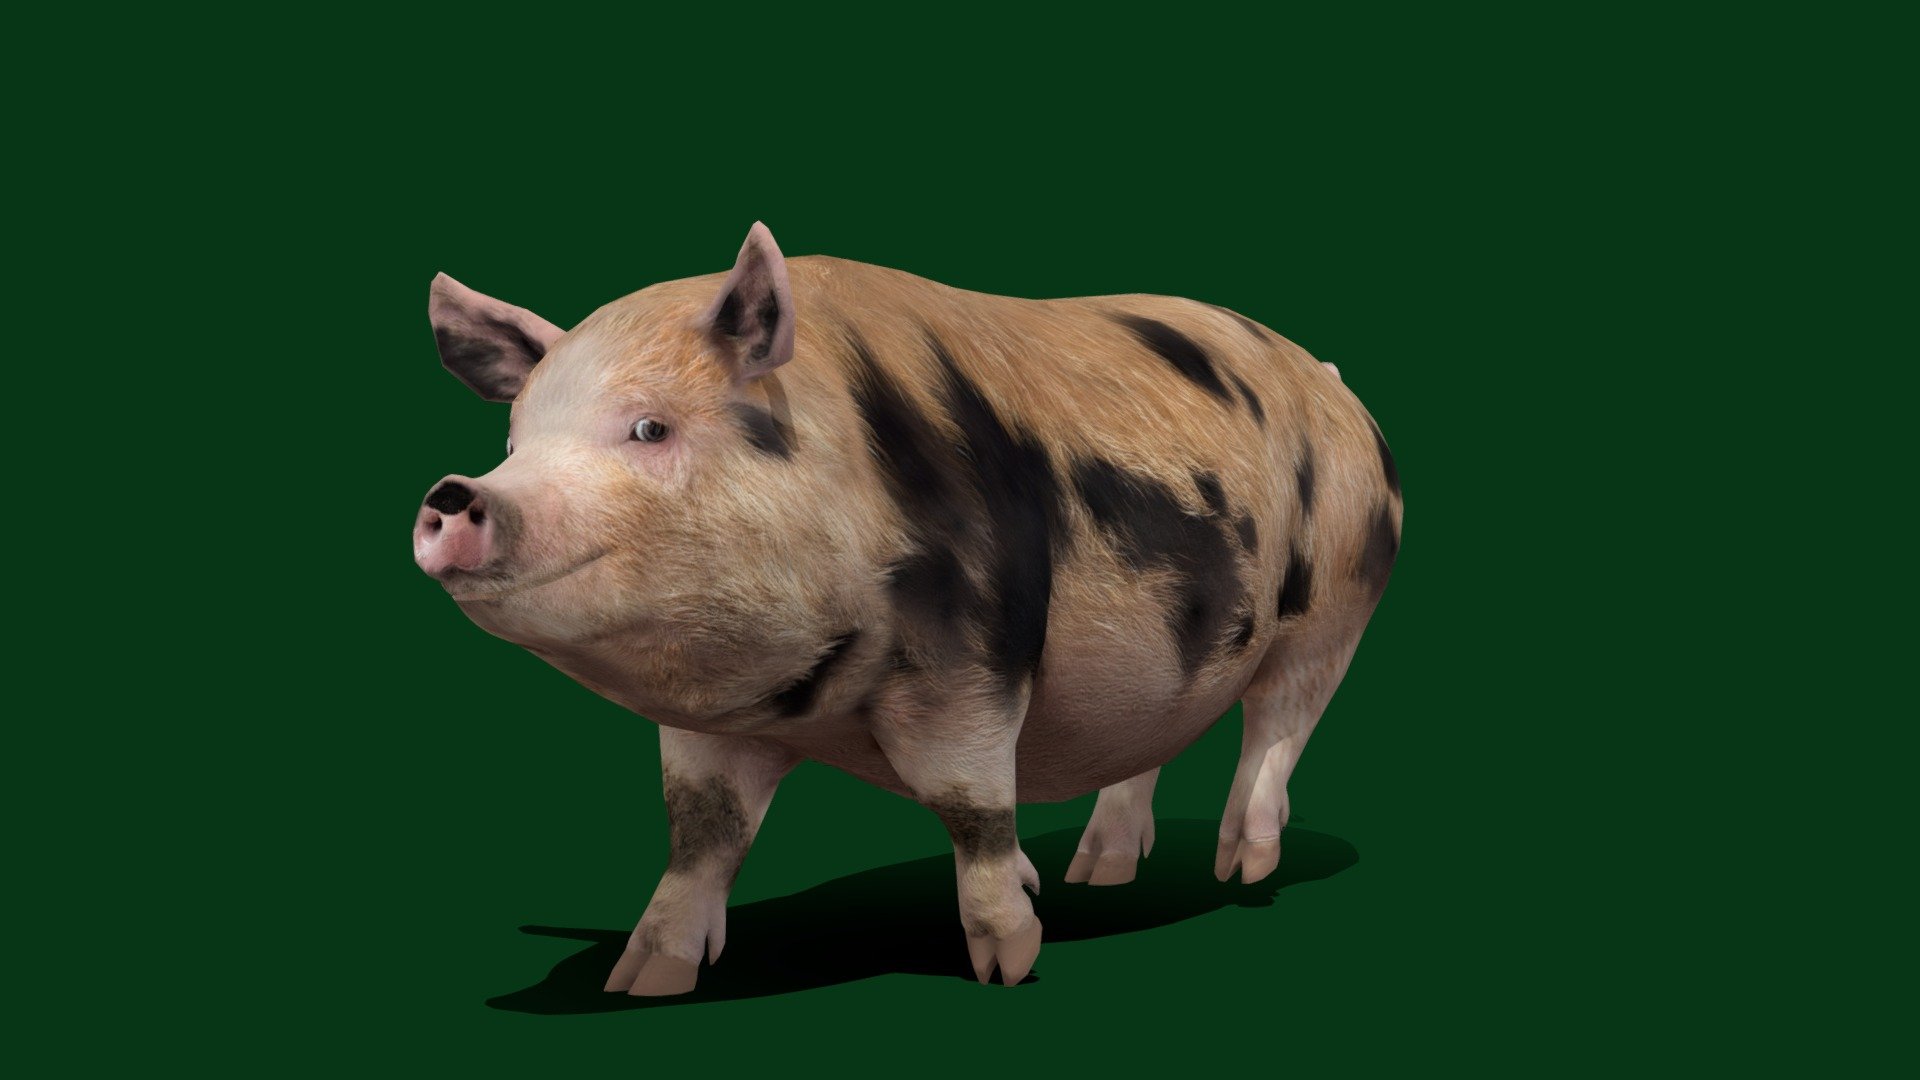 Domestic Pig (Oxford Sandy and Black )

Plum Pudding

Sus scrofa domesticus Pig Mammal (Oxford Forest pig)

1 Draw Calls

Gameready

13 Animations

4K PBR Textures Material

Unreal FBX

Unity FBX  

Blend File 

USDZ File (AR Ready). Real Scale Dimension

Textures Files

GLB File

Gltf File ( Spark AR, Lens Studio(SnapChat) , Effector(Tiktok) , Spline, Play Canvas ) Compatible



Triangles: 4978

Vertices: 2058

Diffuse , Metallic, Roughness , Normal Map ,Specular Map,AO

The Oxford Sandy and Black is a breed of domestic pig originating in Oxfordshire. Named for its colour, which is a base of sandy brown with black patches, the breed is also sometimes called the &ldquo;Plum Pudding